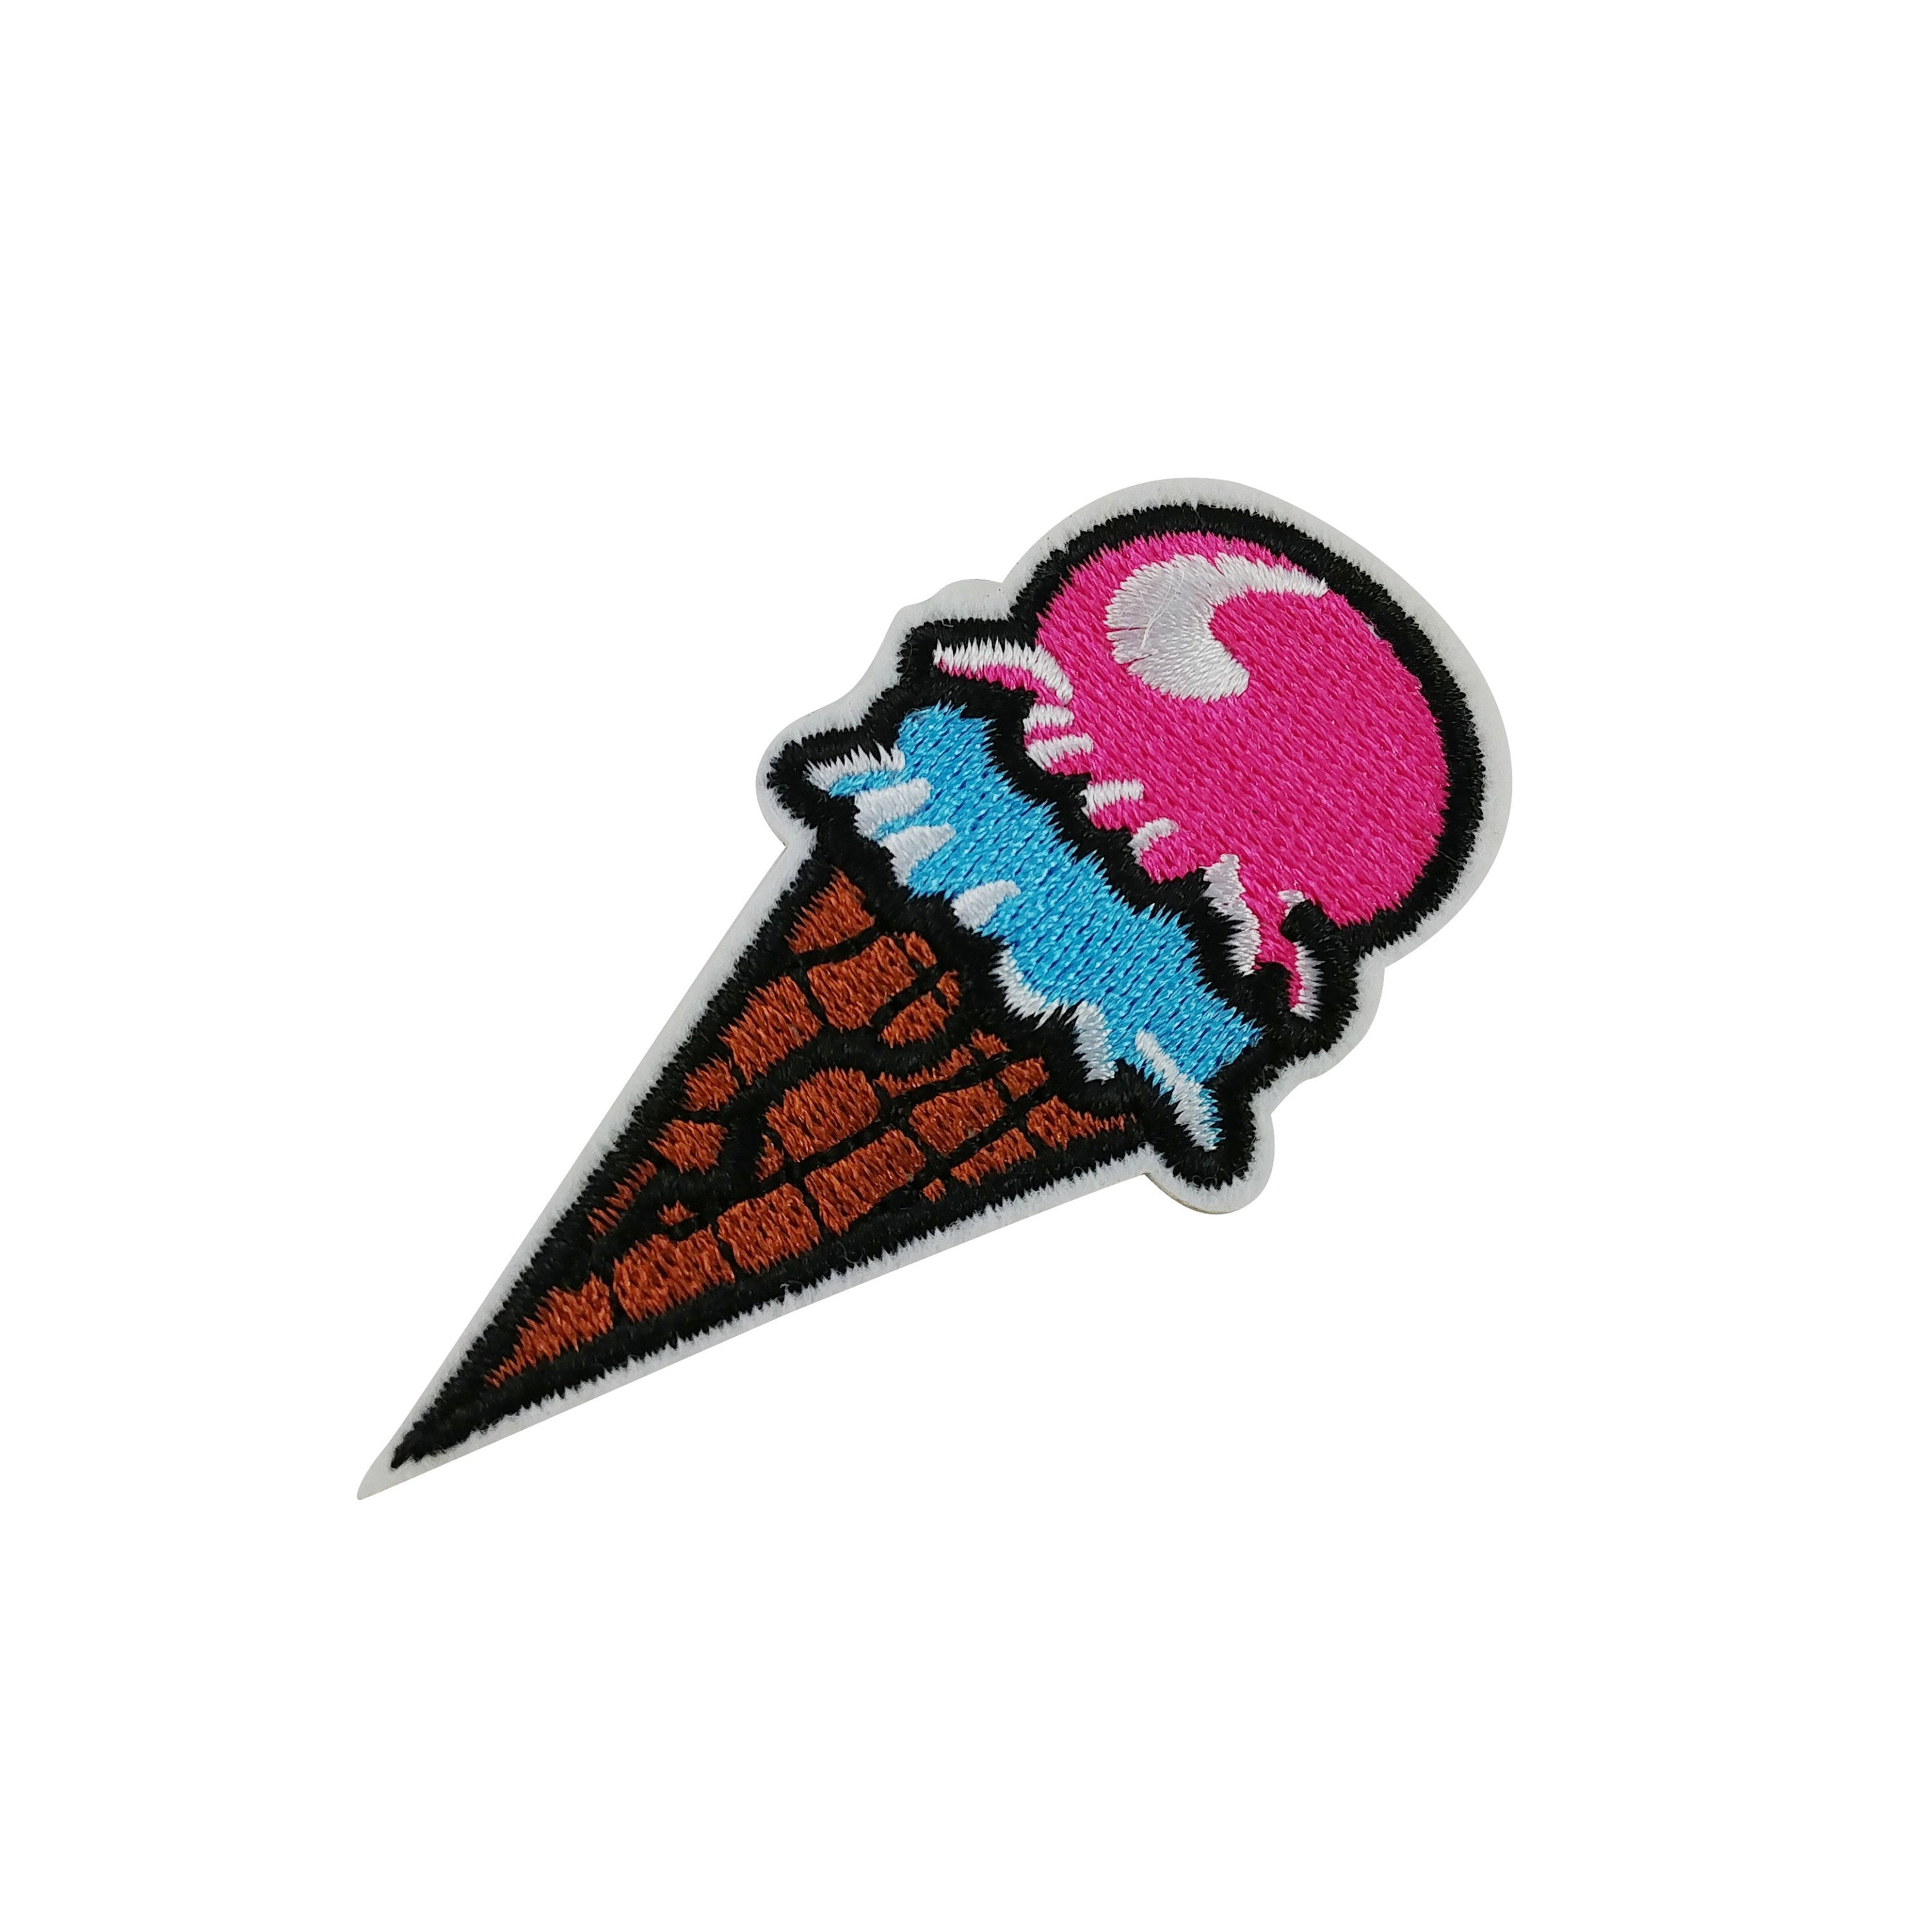 Ice cream iron on patches, embroidered patch, sew on patch